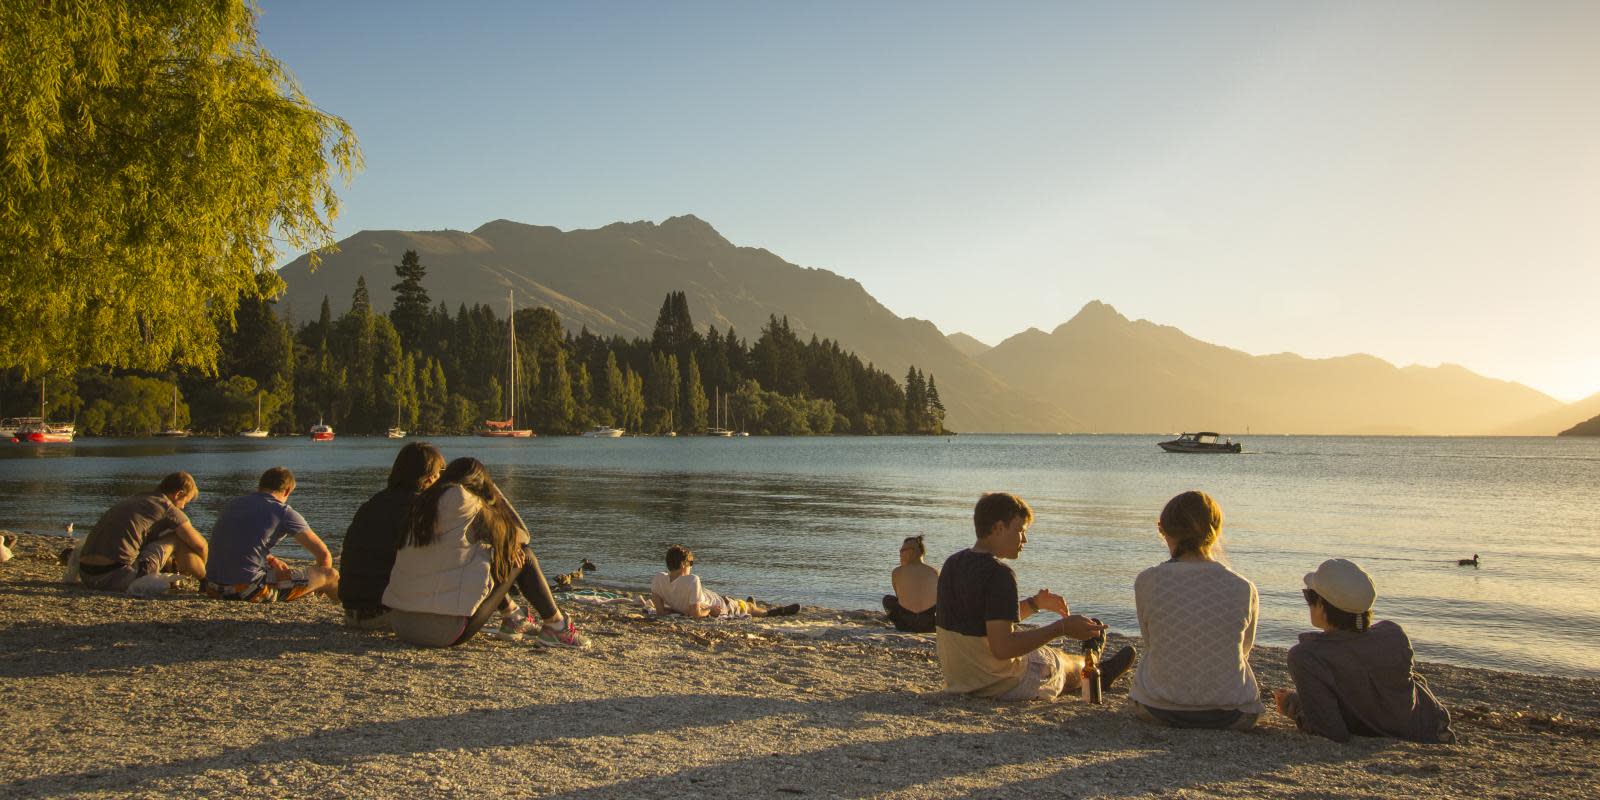 Watching the sunset on Queenstown Bay